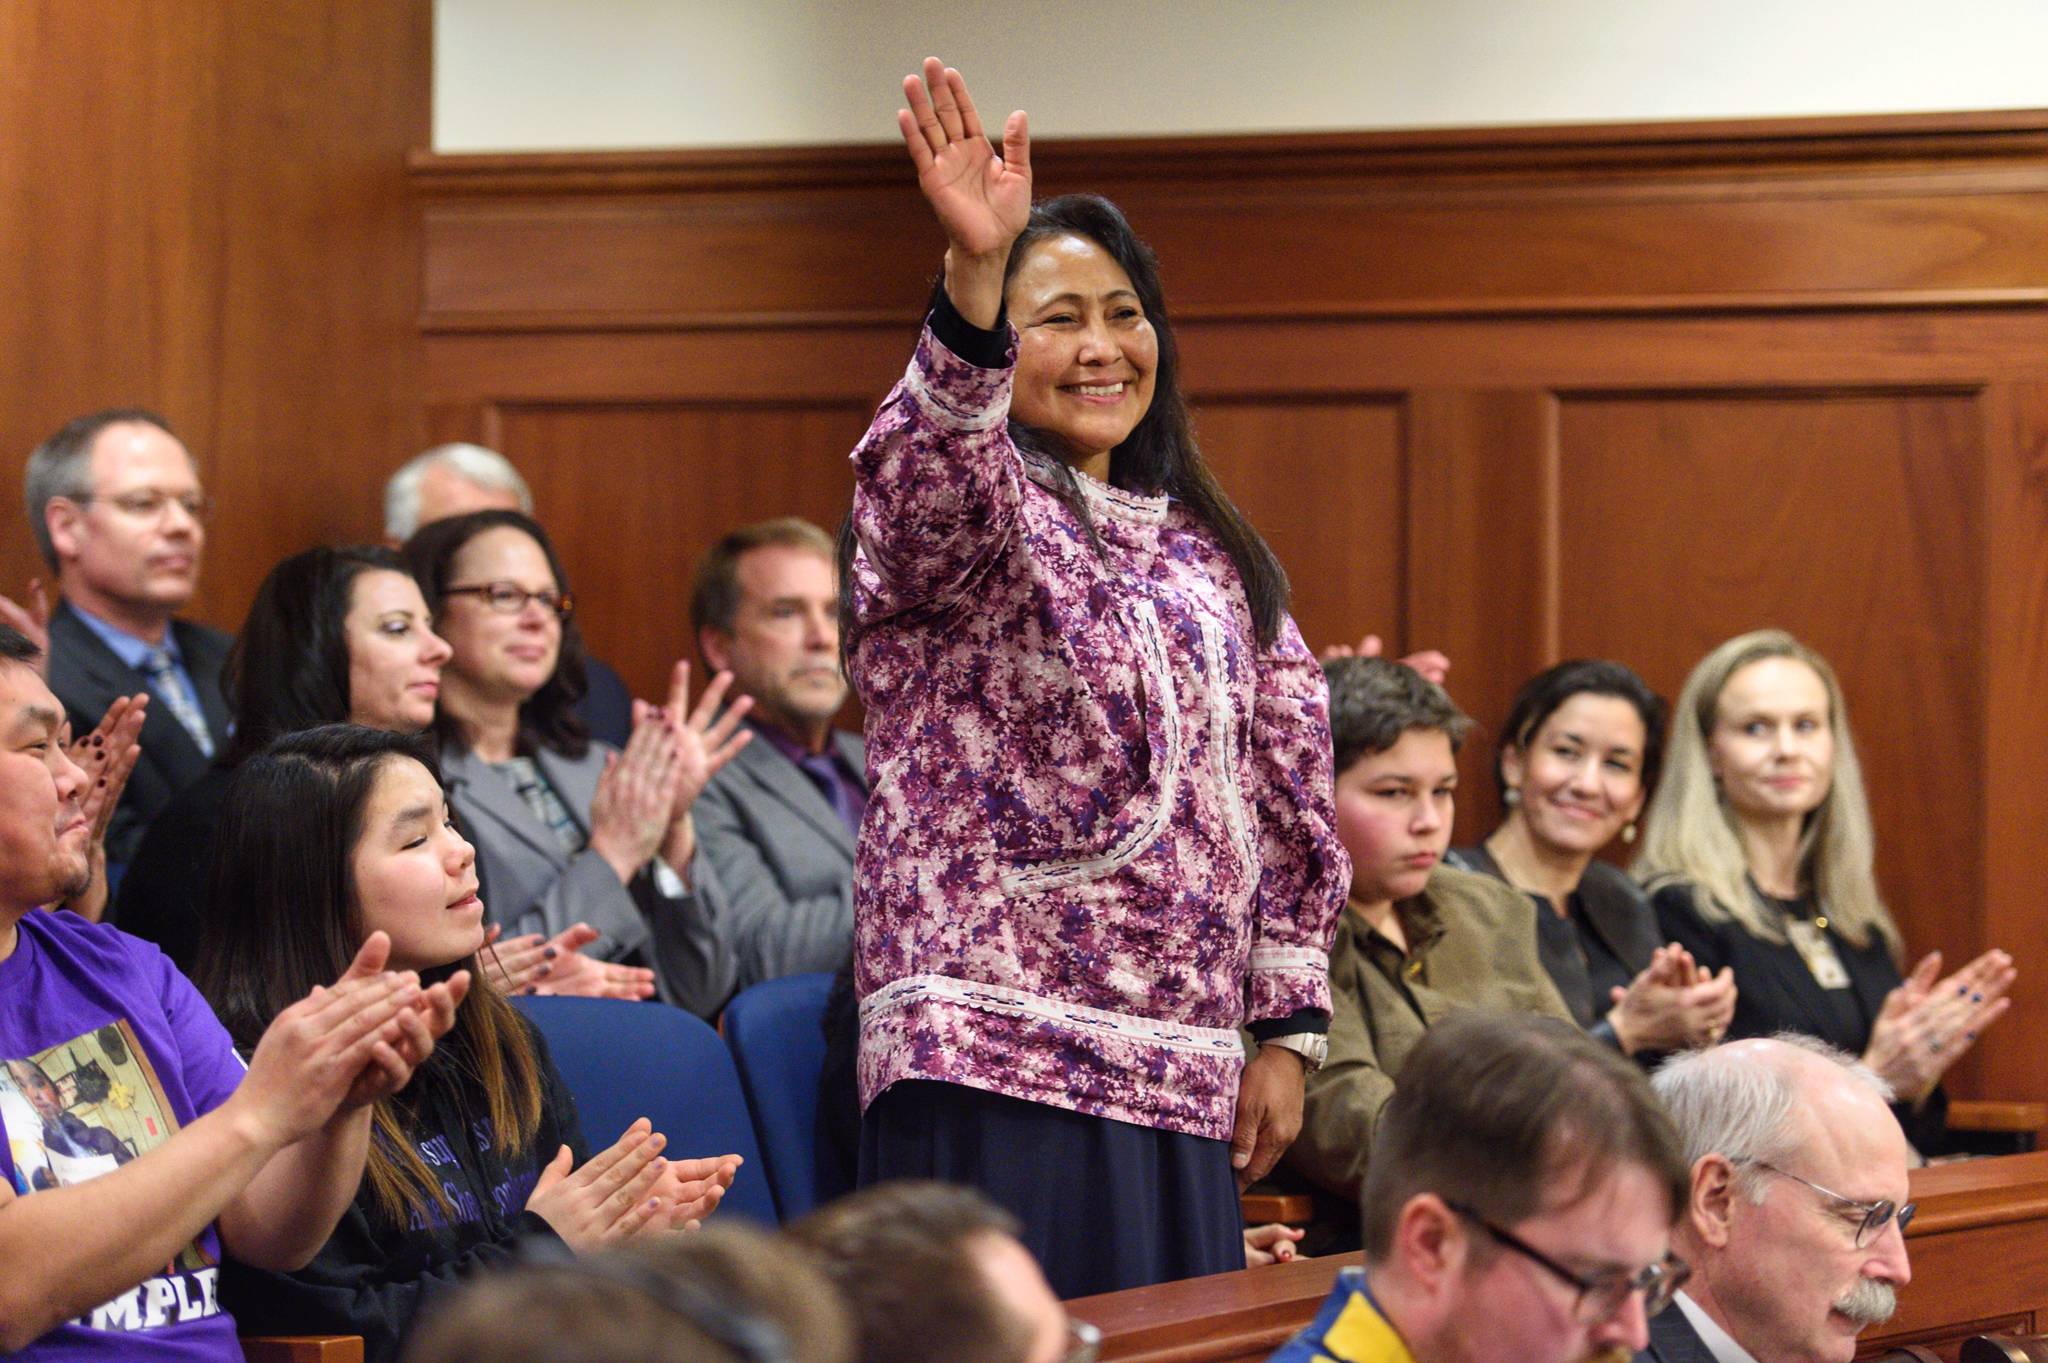 Alaska first lady Rose Dunleavy waves to the crowd after being introduced during Gov. Mike Dunleavy’s State of the State at the Alaska Capitol on Jan. 22, 2019. (Michael Penn | Juneau Empire)